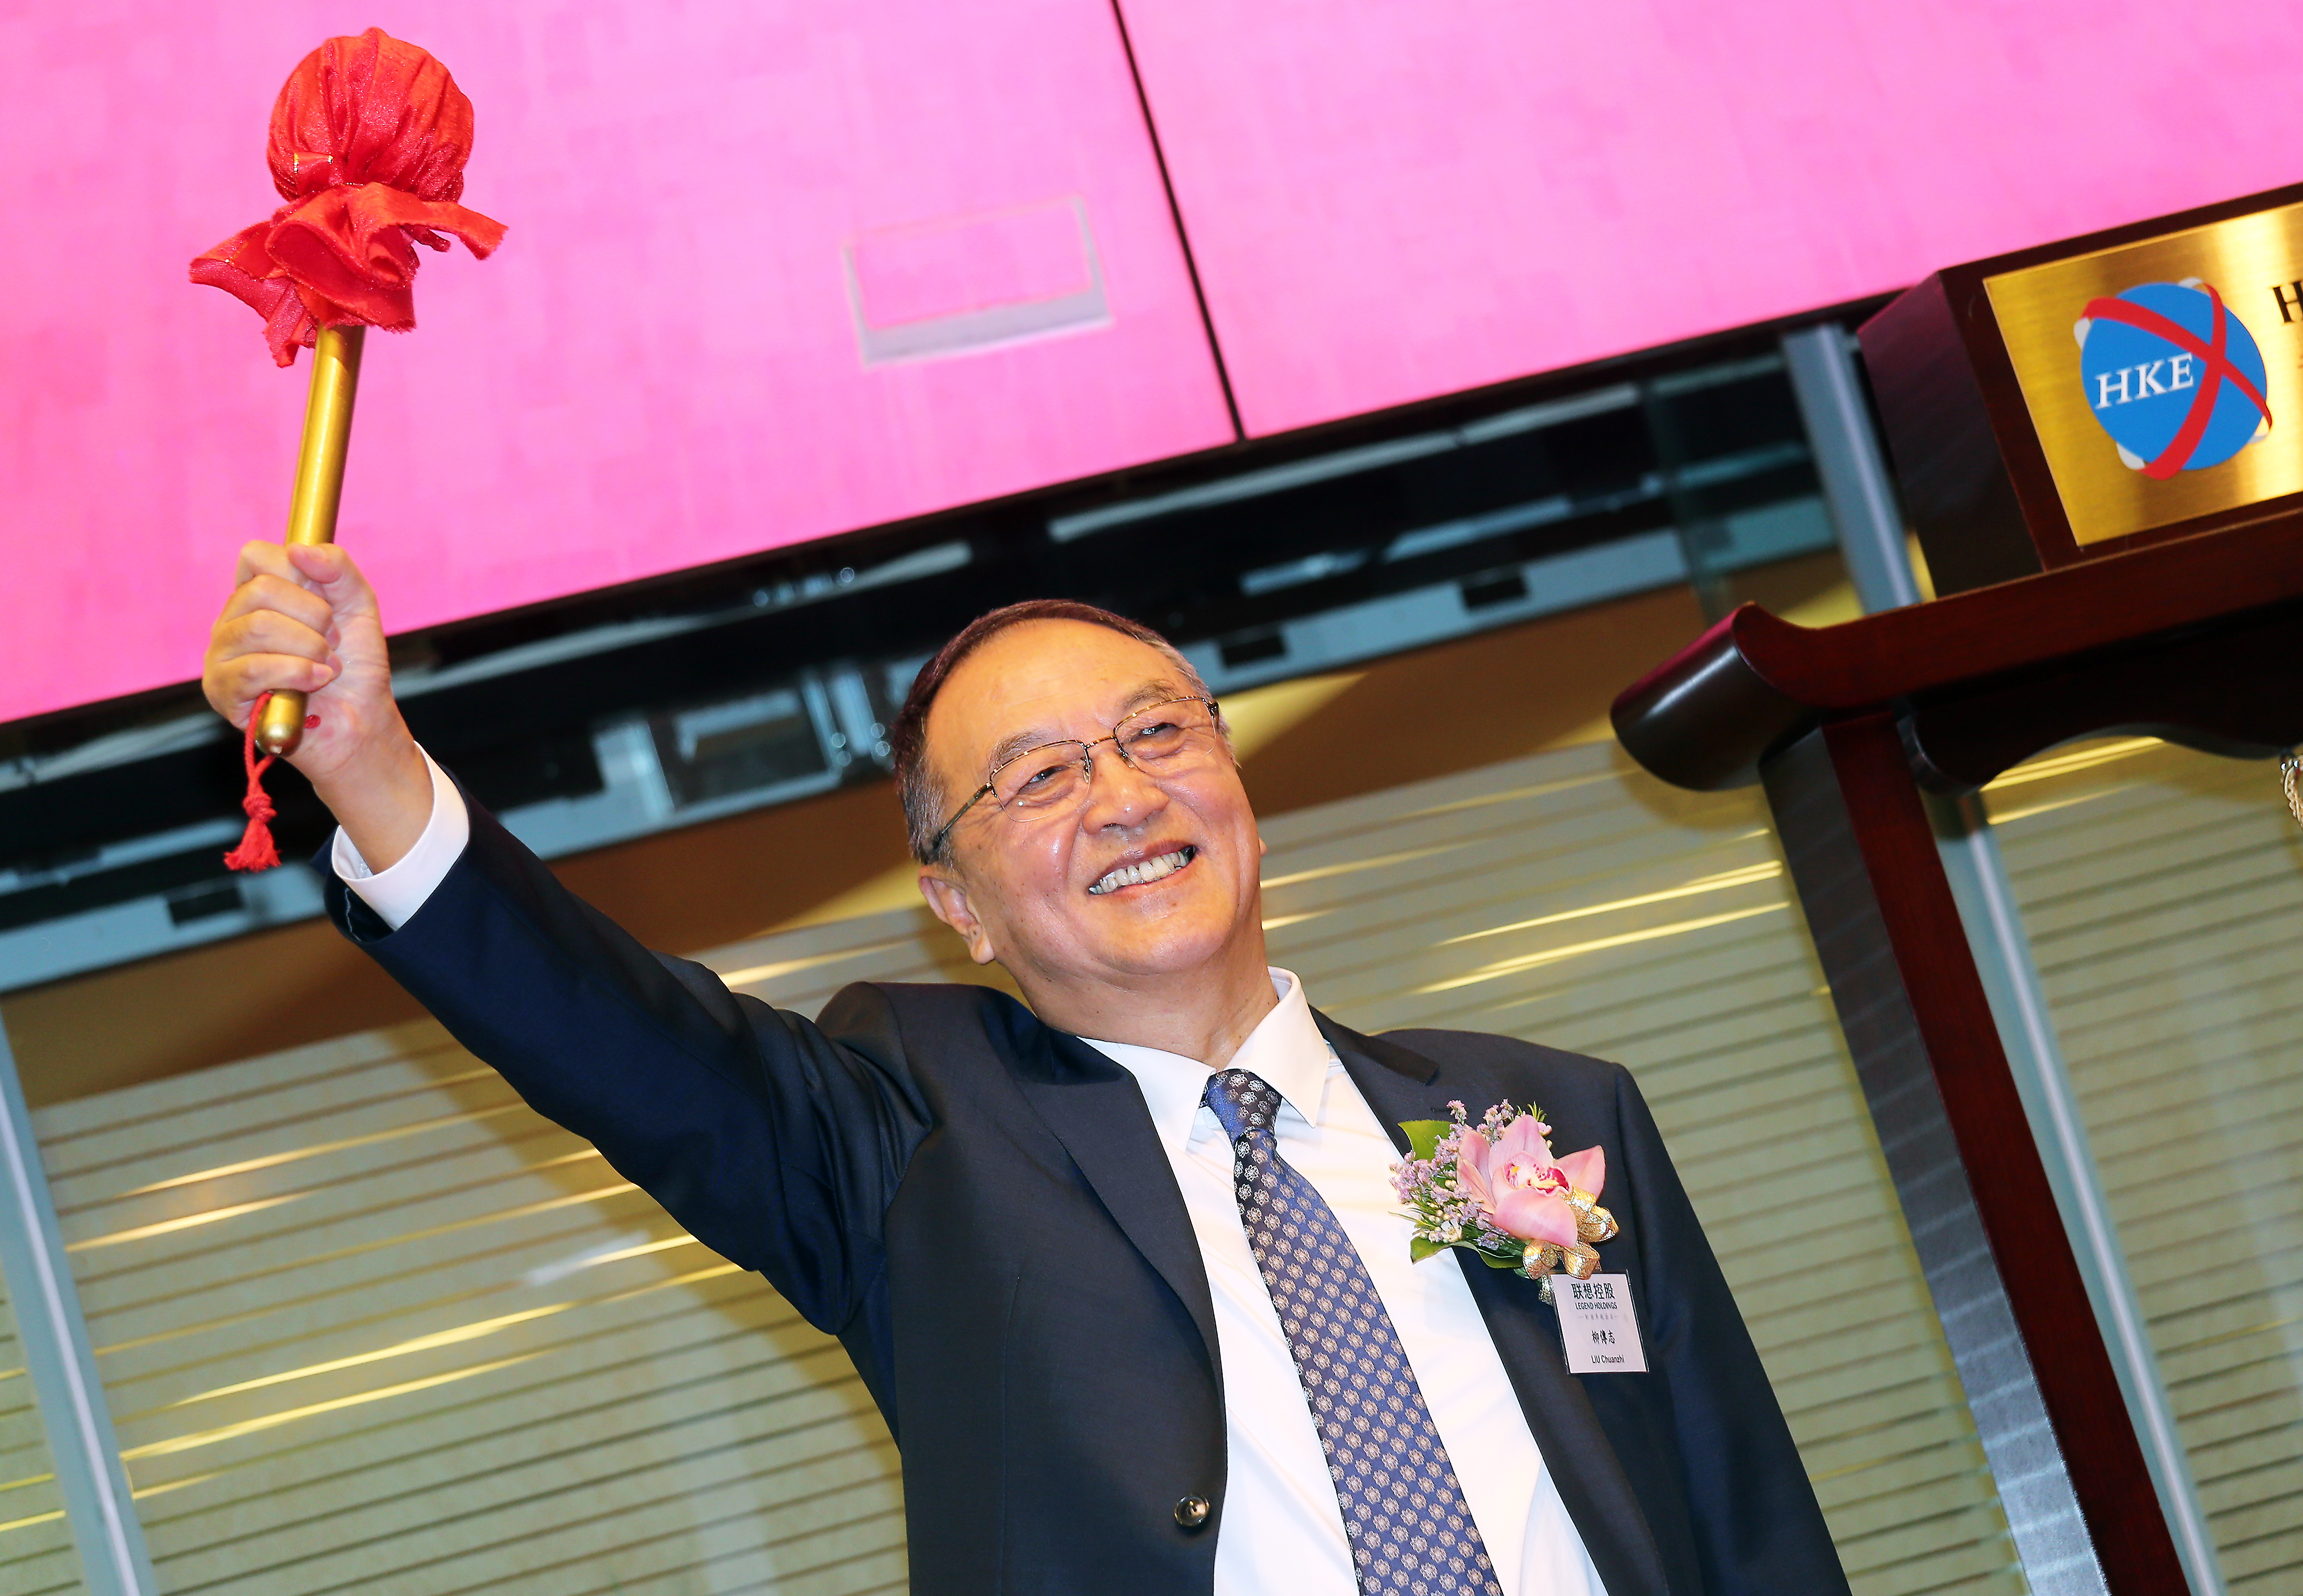 Liu Chuanzhi, the founder of Legend Holdings Corp, at the ceremony celebrating his company's listing in Hong Kong. Photo: David Wong